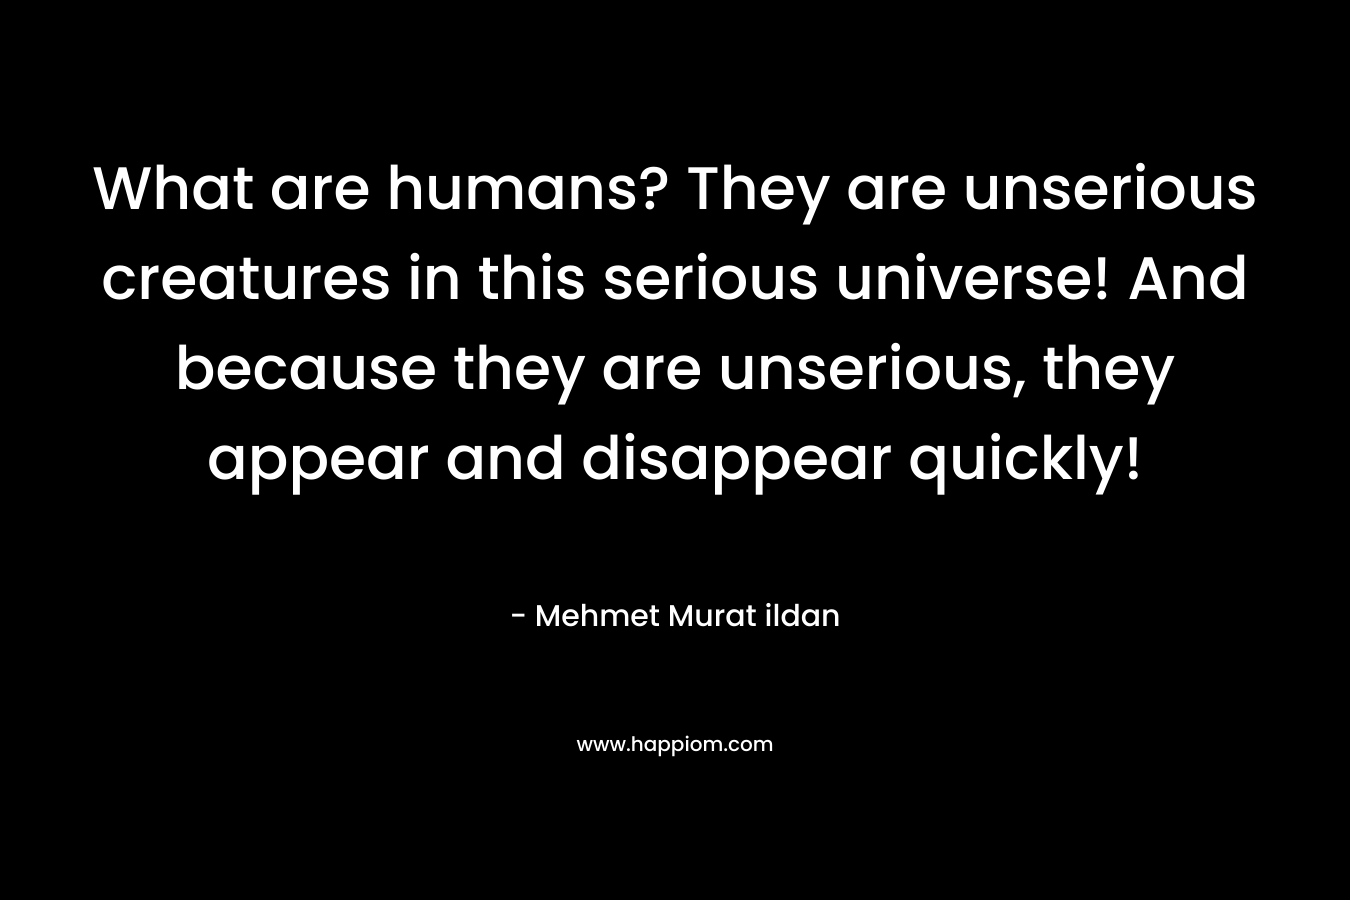 What are humans? They are unserious creatures in this serious universe! And because they are unserious, they appear and disappear quickly! – Mehmet Murat ildan